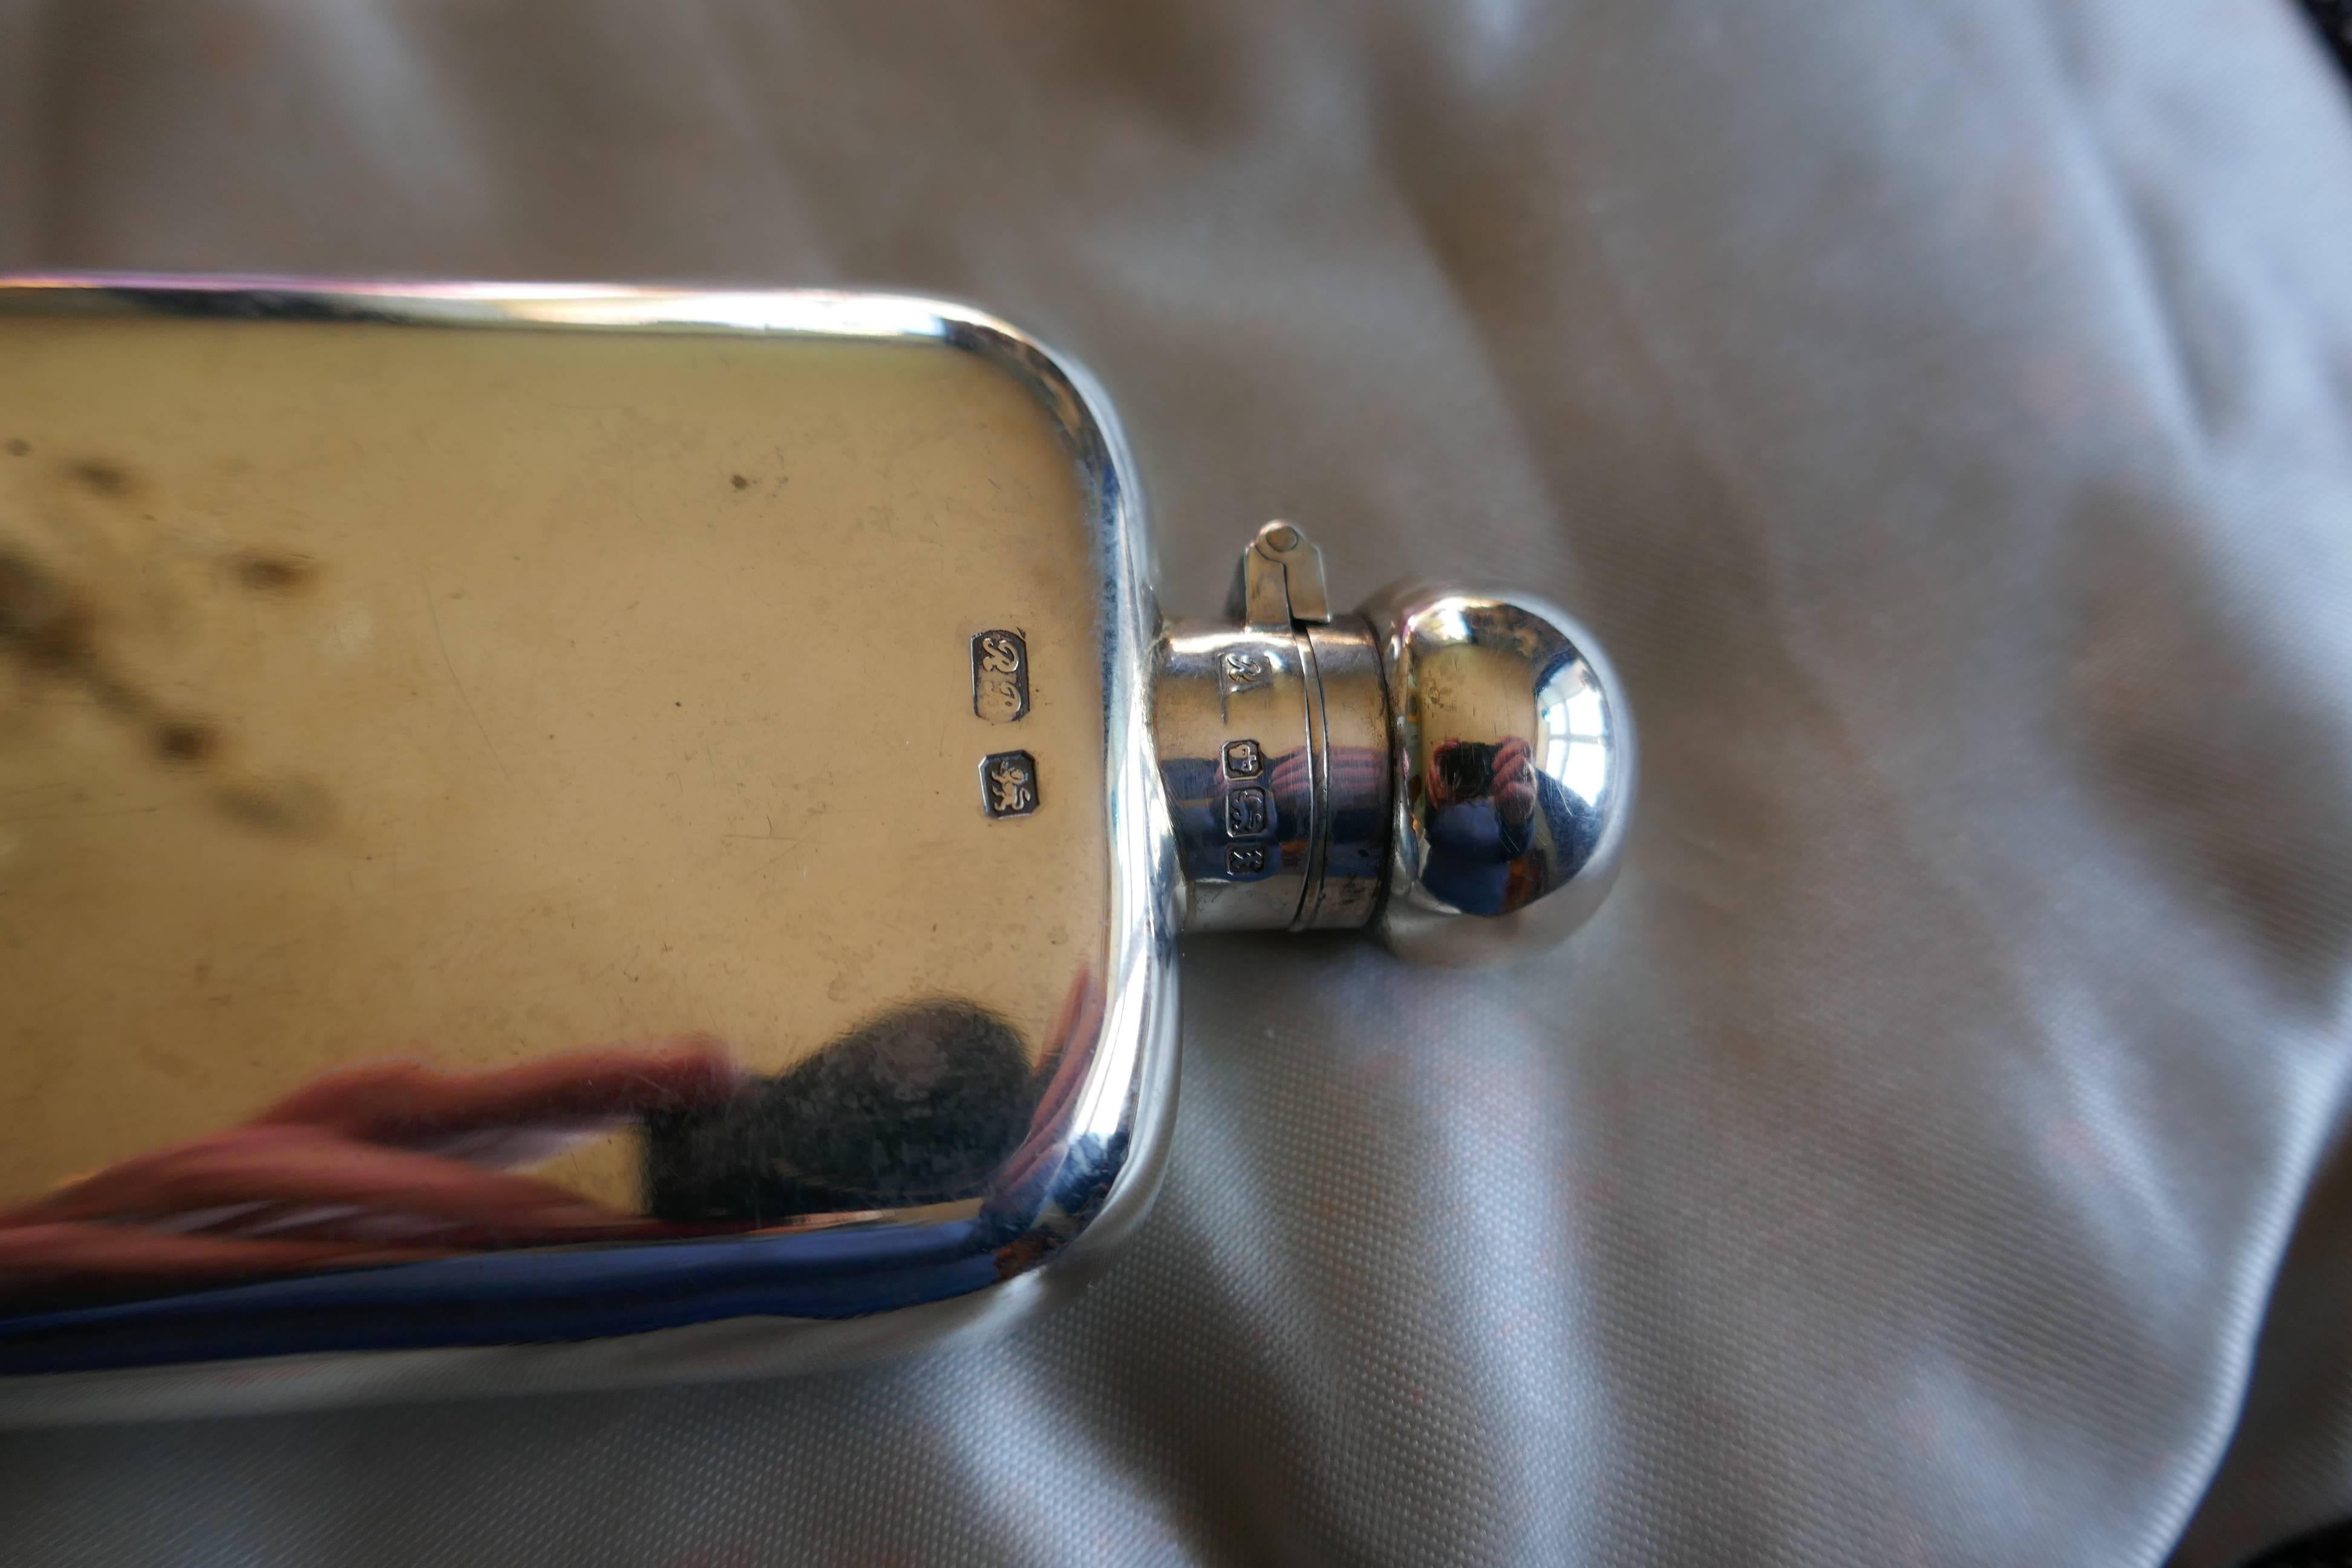 Silver Hallmarked hip or pocket flask, Richard Burbridge date 1915

A lovely piece the flask has a rounded shape with no sharp corners, making it ideal to keep in either a breast or hip pocket, the lid is hinged with a screw grip.
The flask is